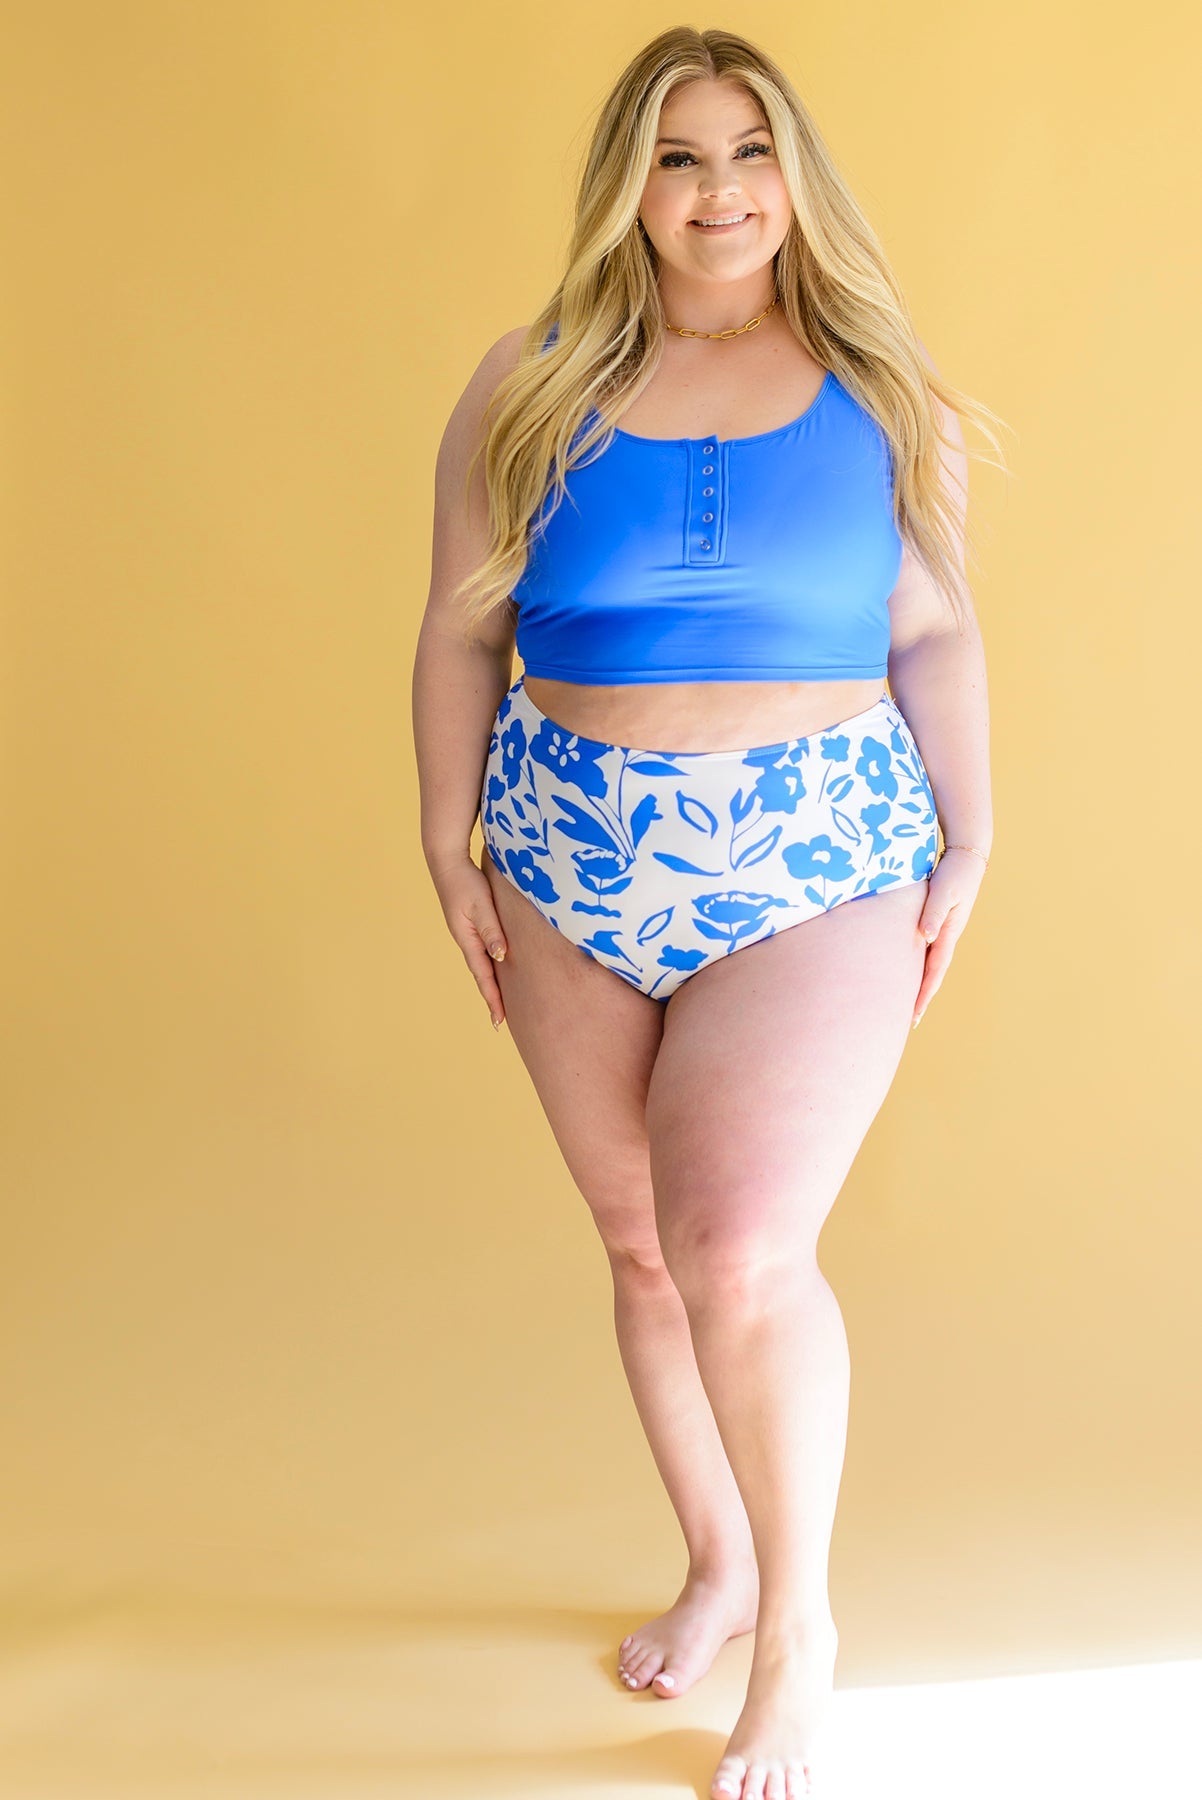 UNDER THE SEA SWIM TOP AND FLORAL SWIM BOTTOMS